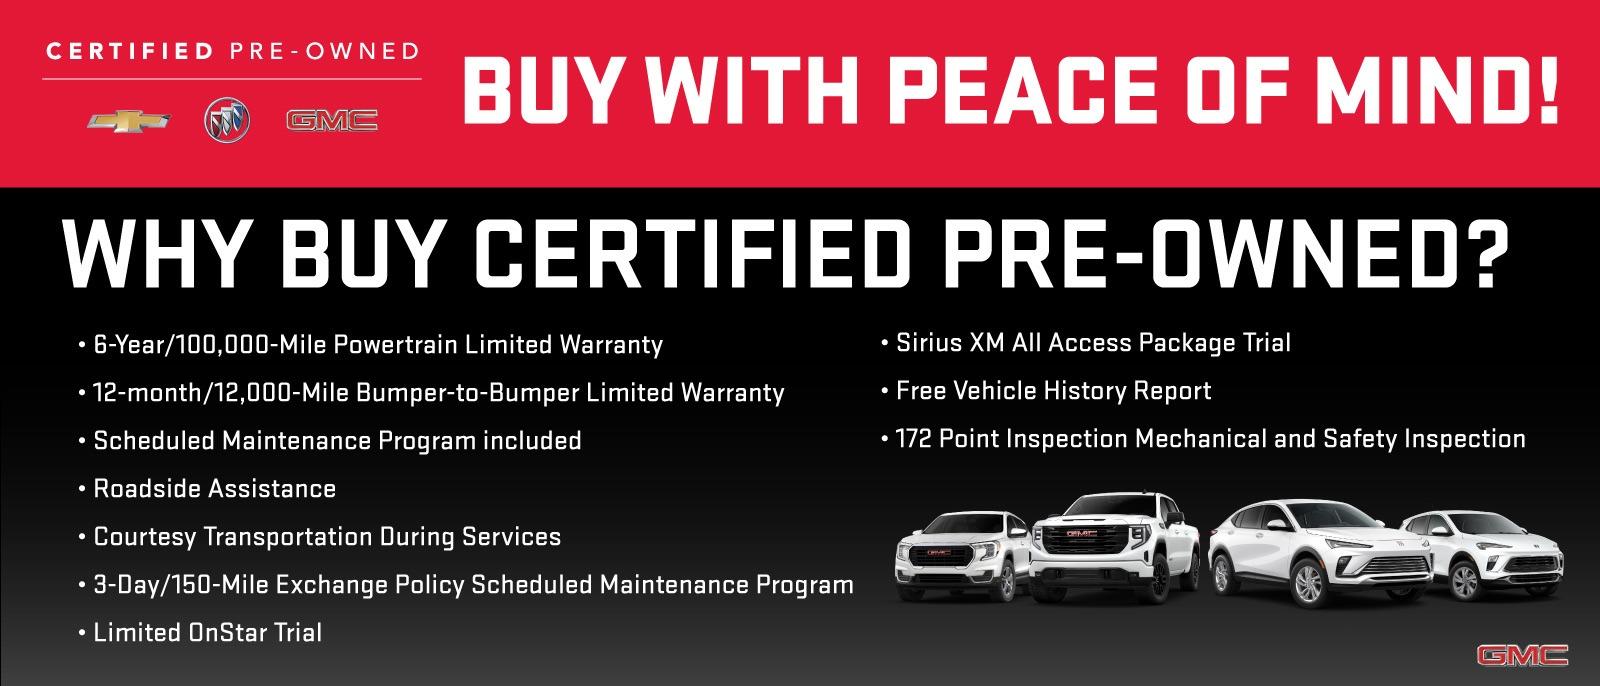 Buy With Peace of Mind? Why Buy Certified Pre-Owned?